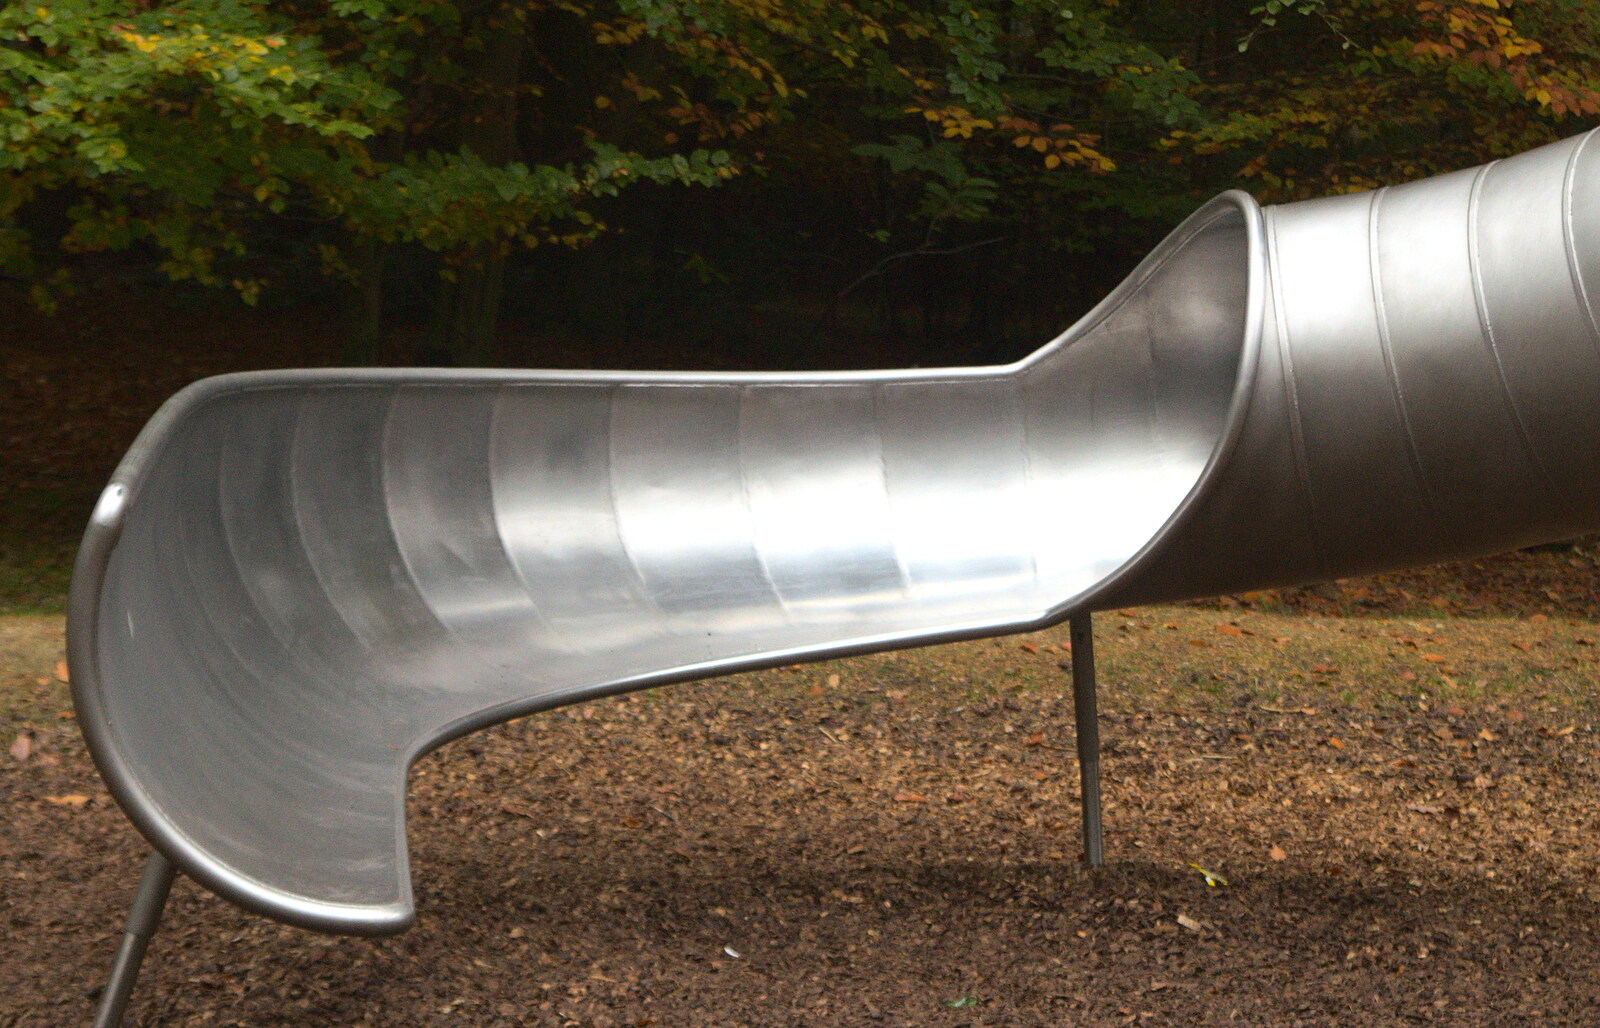 A slide is like some sort of modern art scuplture from A Day at High Lodge, Brandon Forest, Suffolk - 26th October 2015